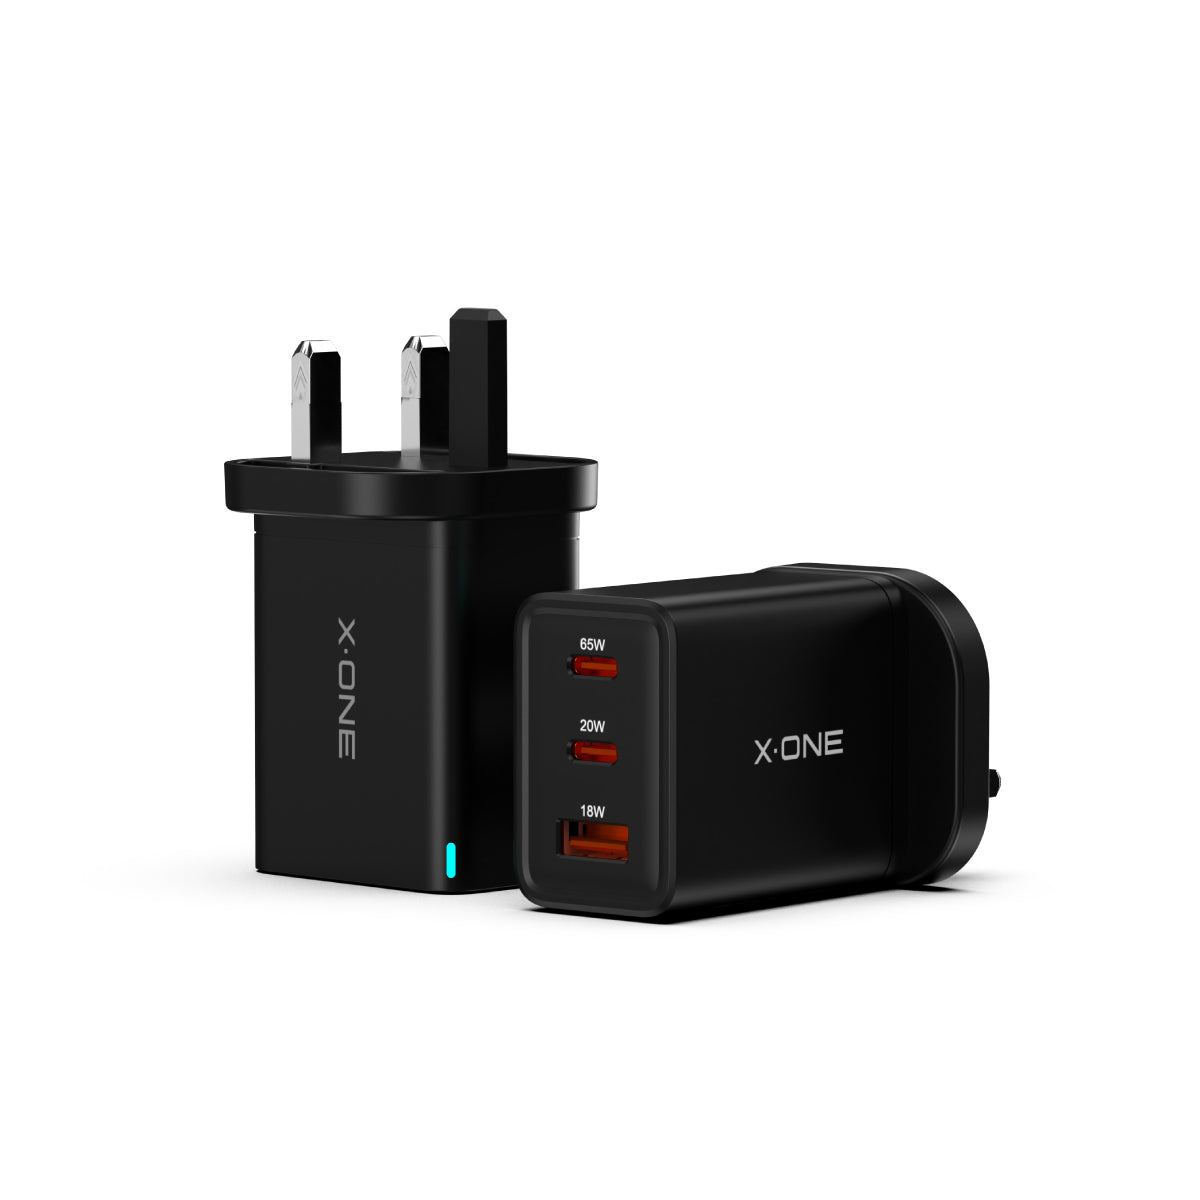 X.One® 65W GaN 6 Turbo Ultra Fast Charger (3-Ports)